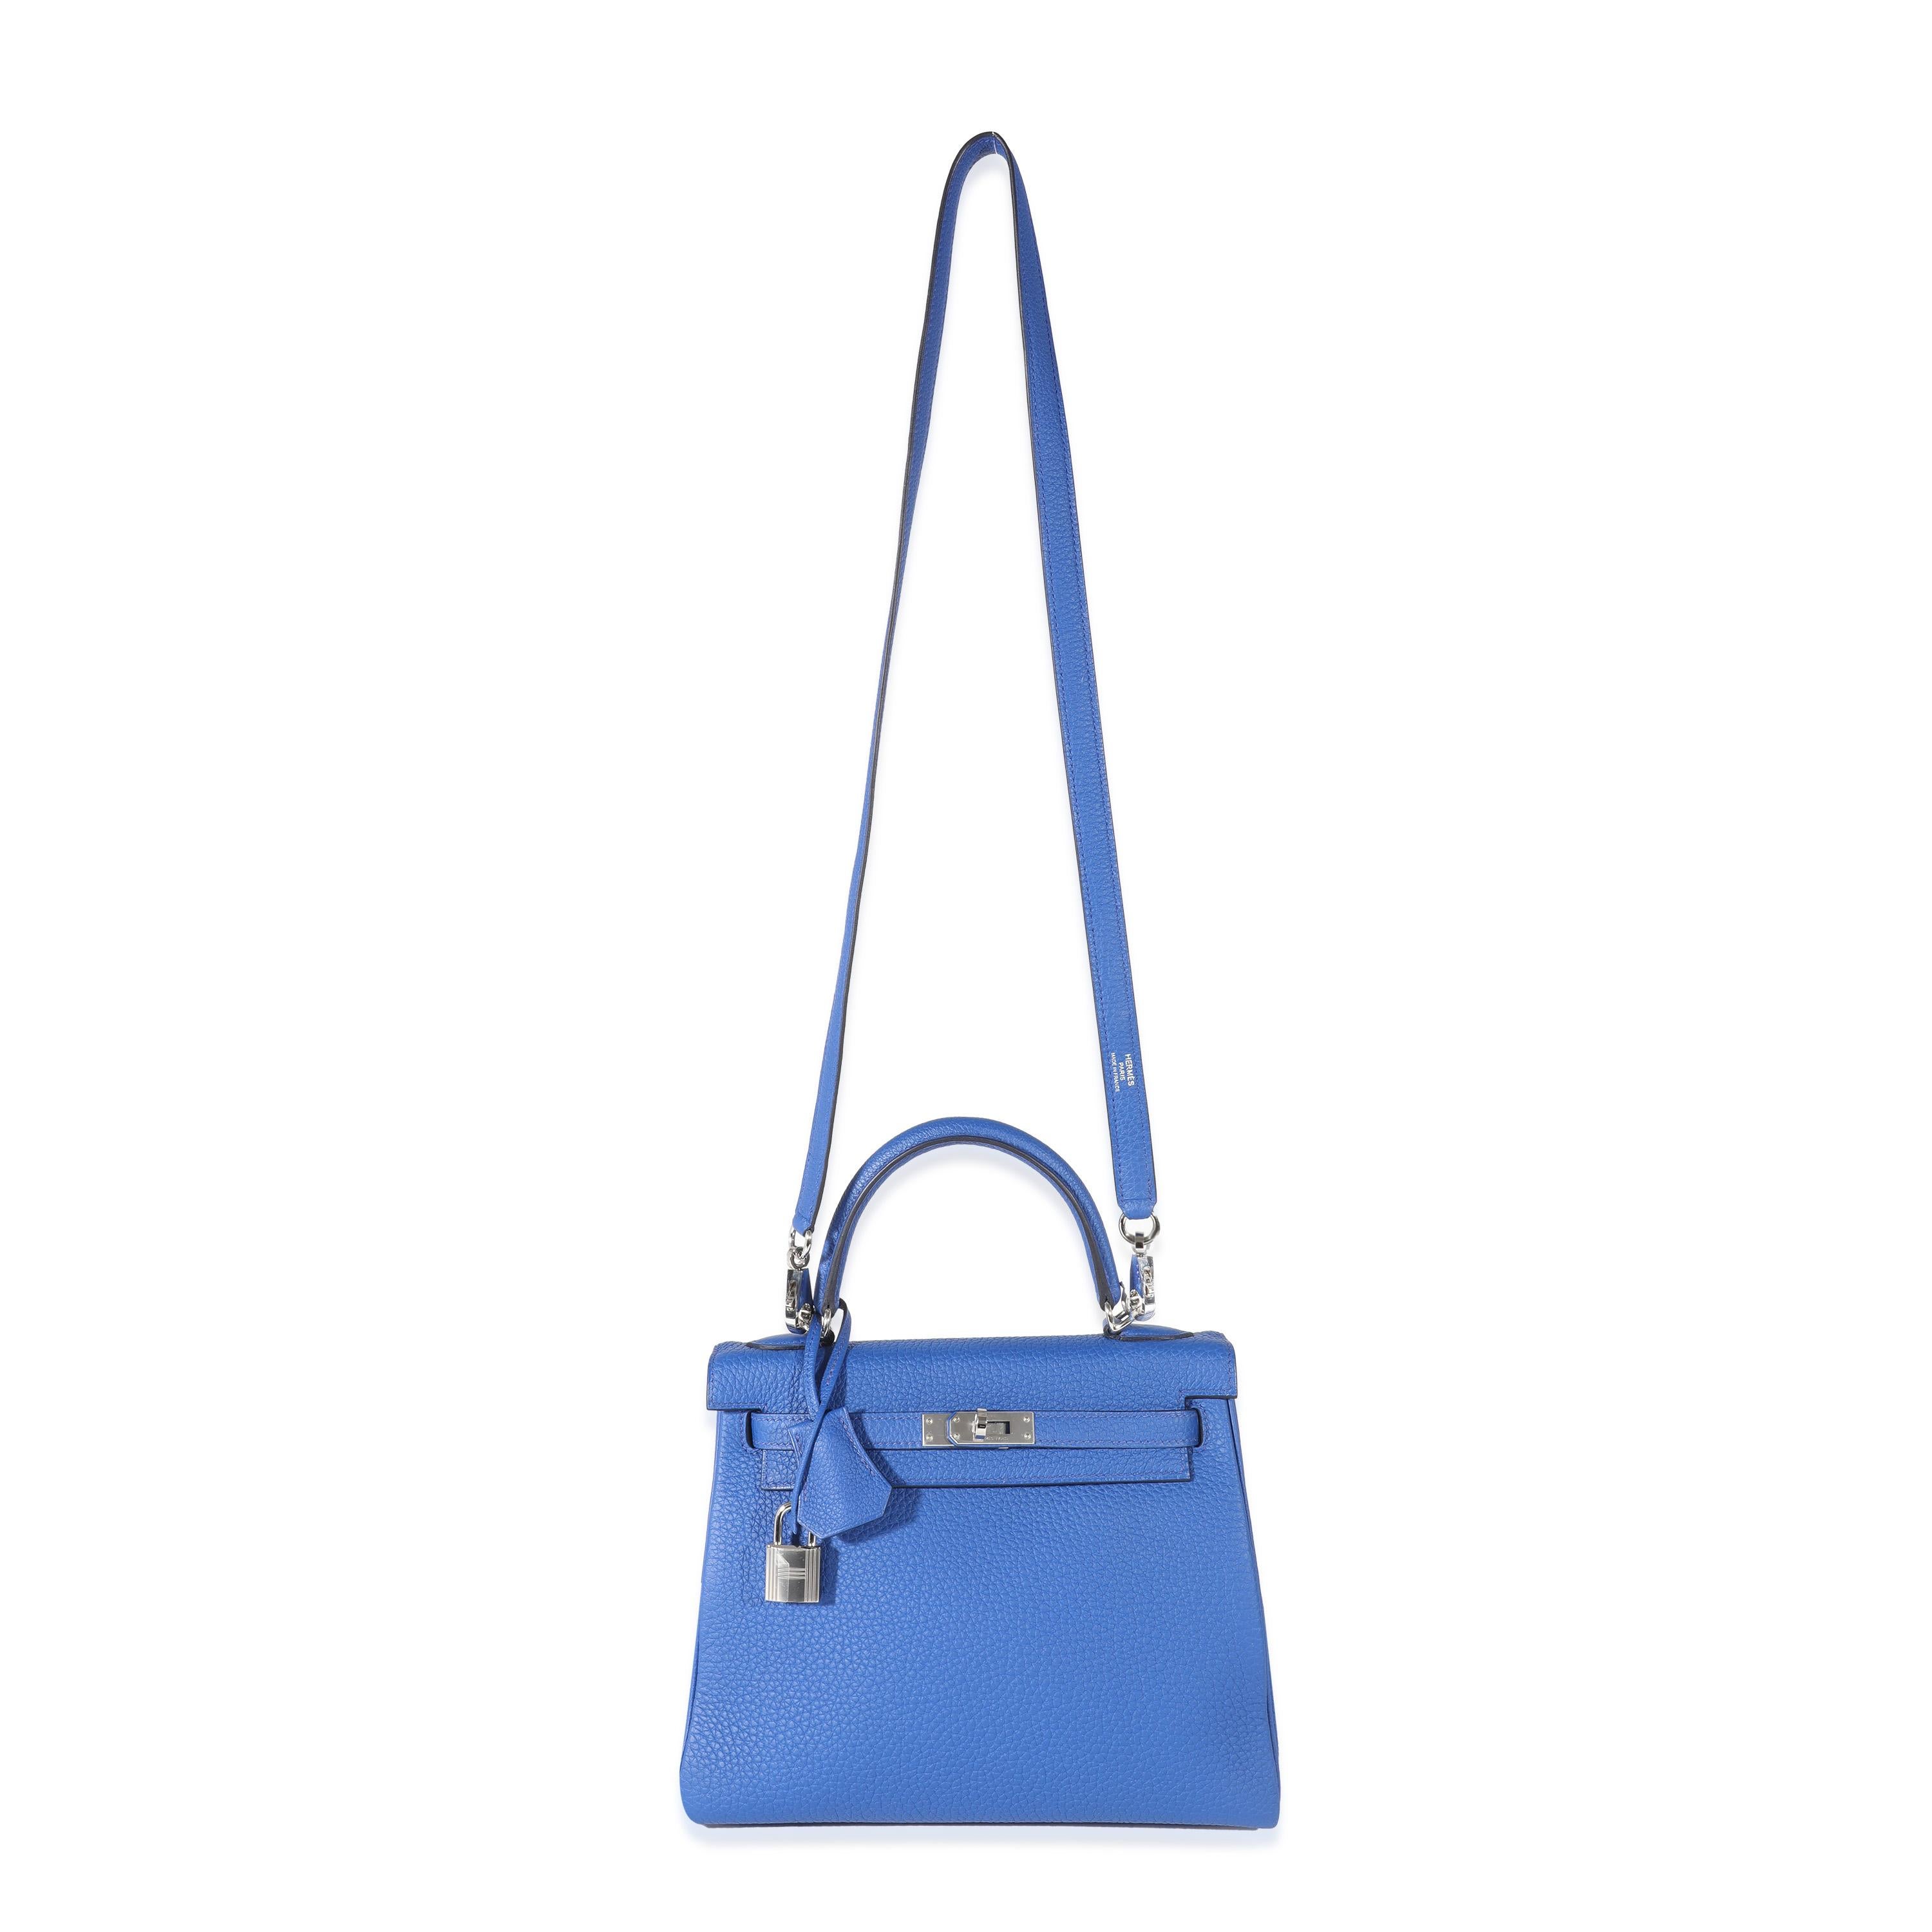 Hermes Bleu Royal Togo Kelly Retourne 25 PHW In Excellent Condition For Sale In New York, NY